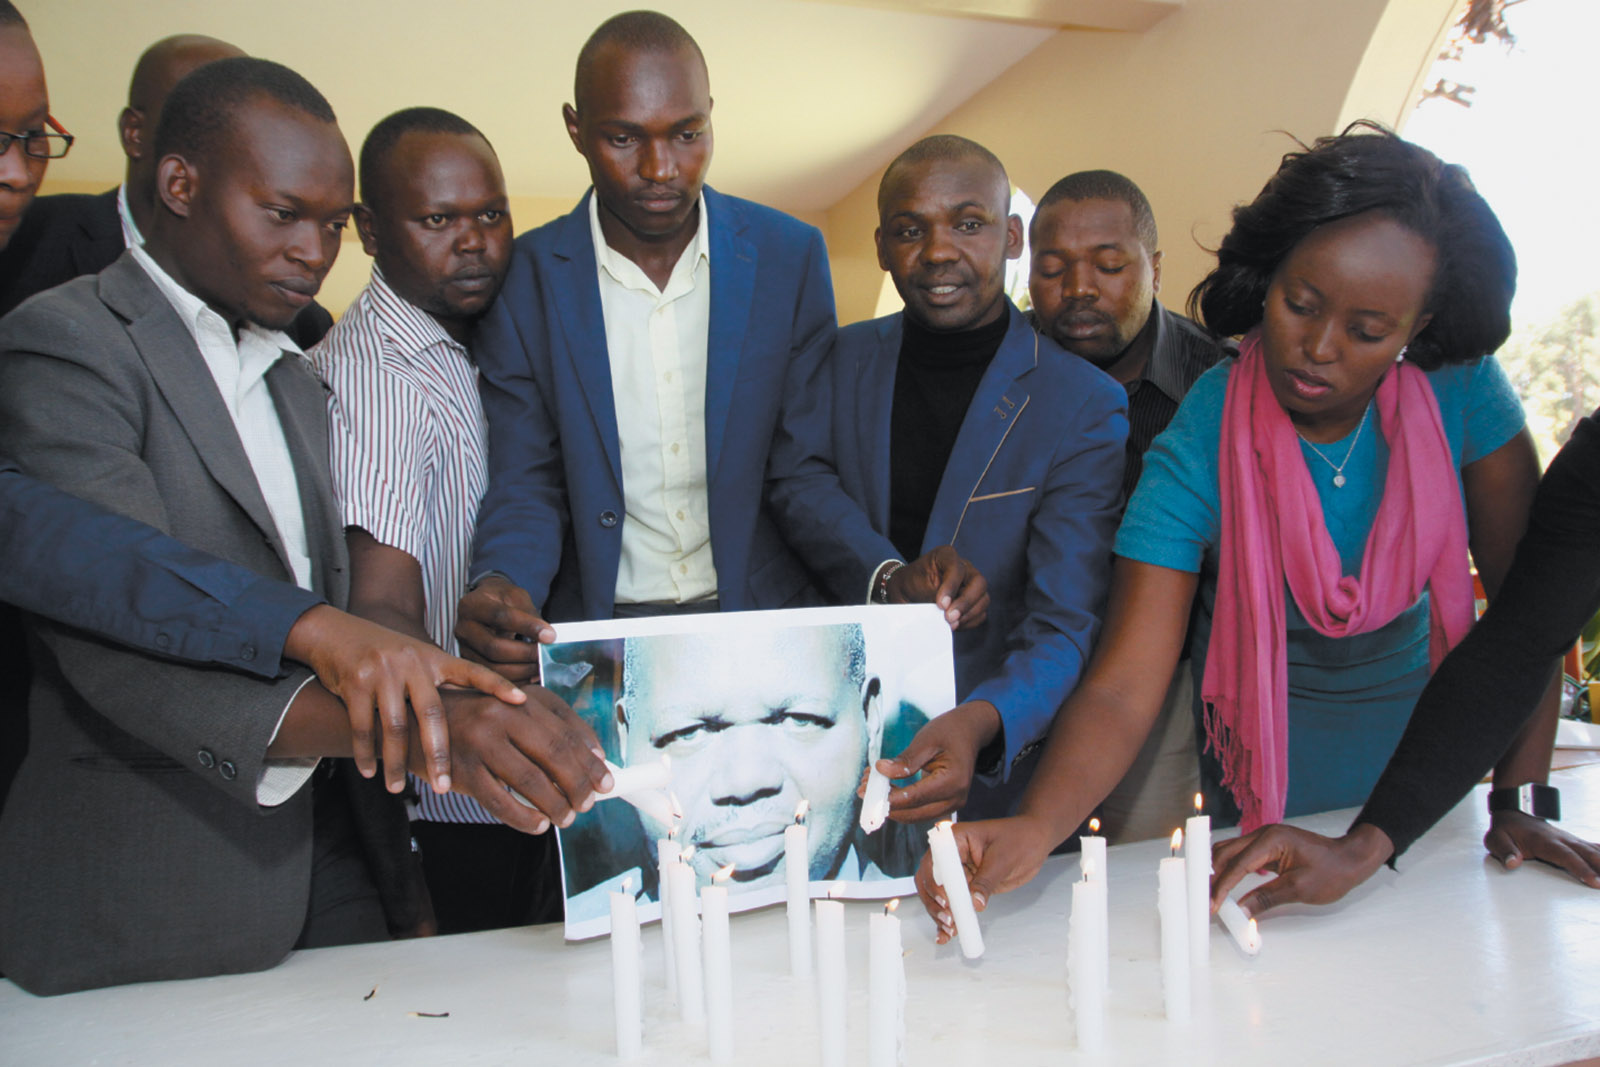 Journalists lighting candles in memory of newspaper editor John Kituyi on World Press Freedom Day, Eldoret, Kenya, May 2016. Kituyi was killed the year before while preparing to publish the results of an investigation that, according to Alan Rusbridger, ‘could have embarrassed leading figures in Kenya’s national government.’